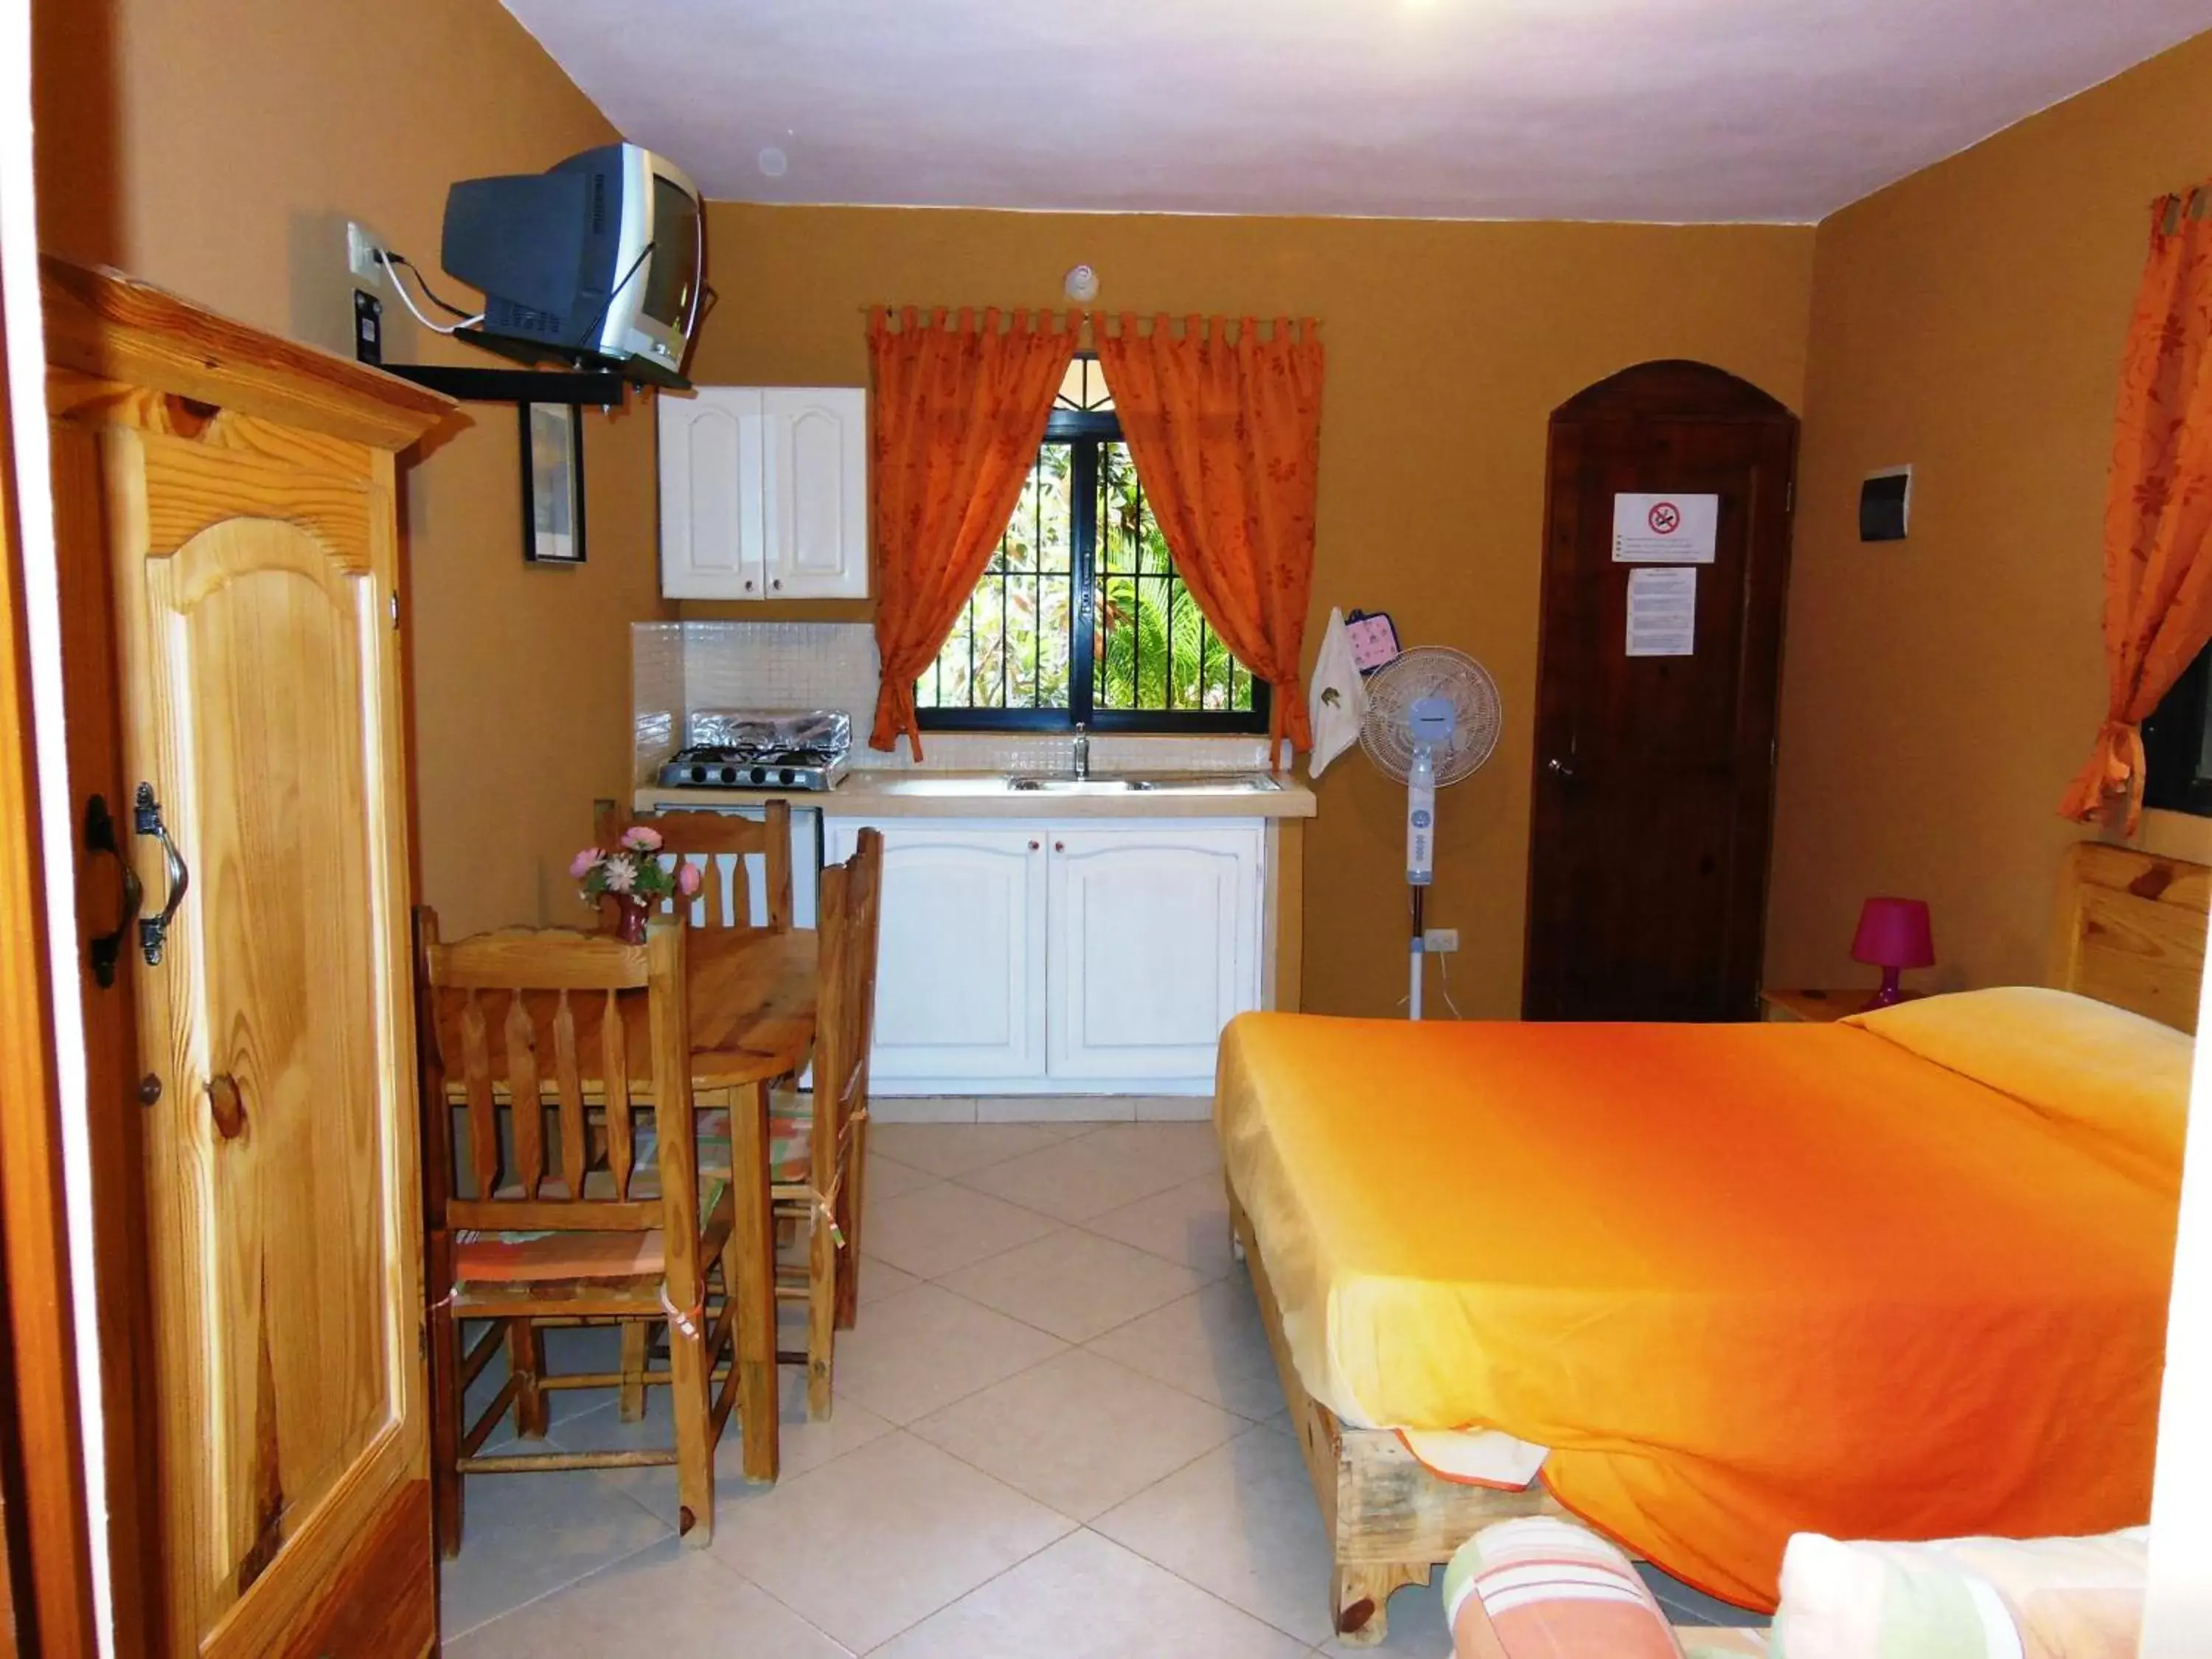 Kitchen or kitchenette, Room Photo in Casa Lily & Coco